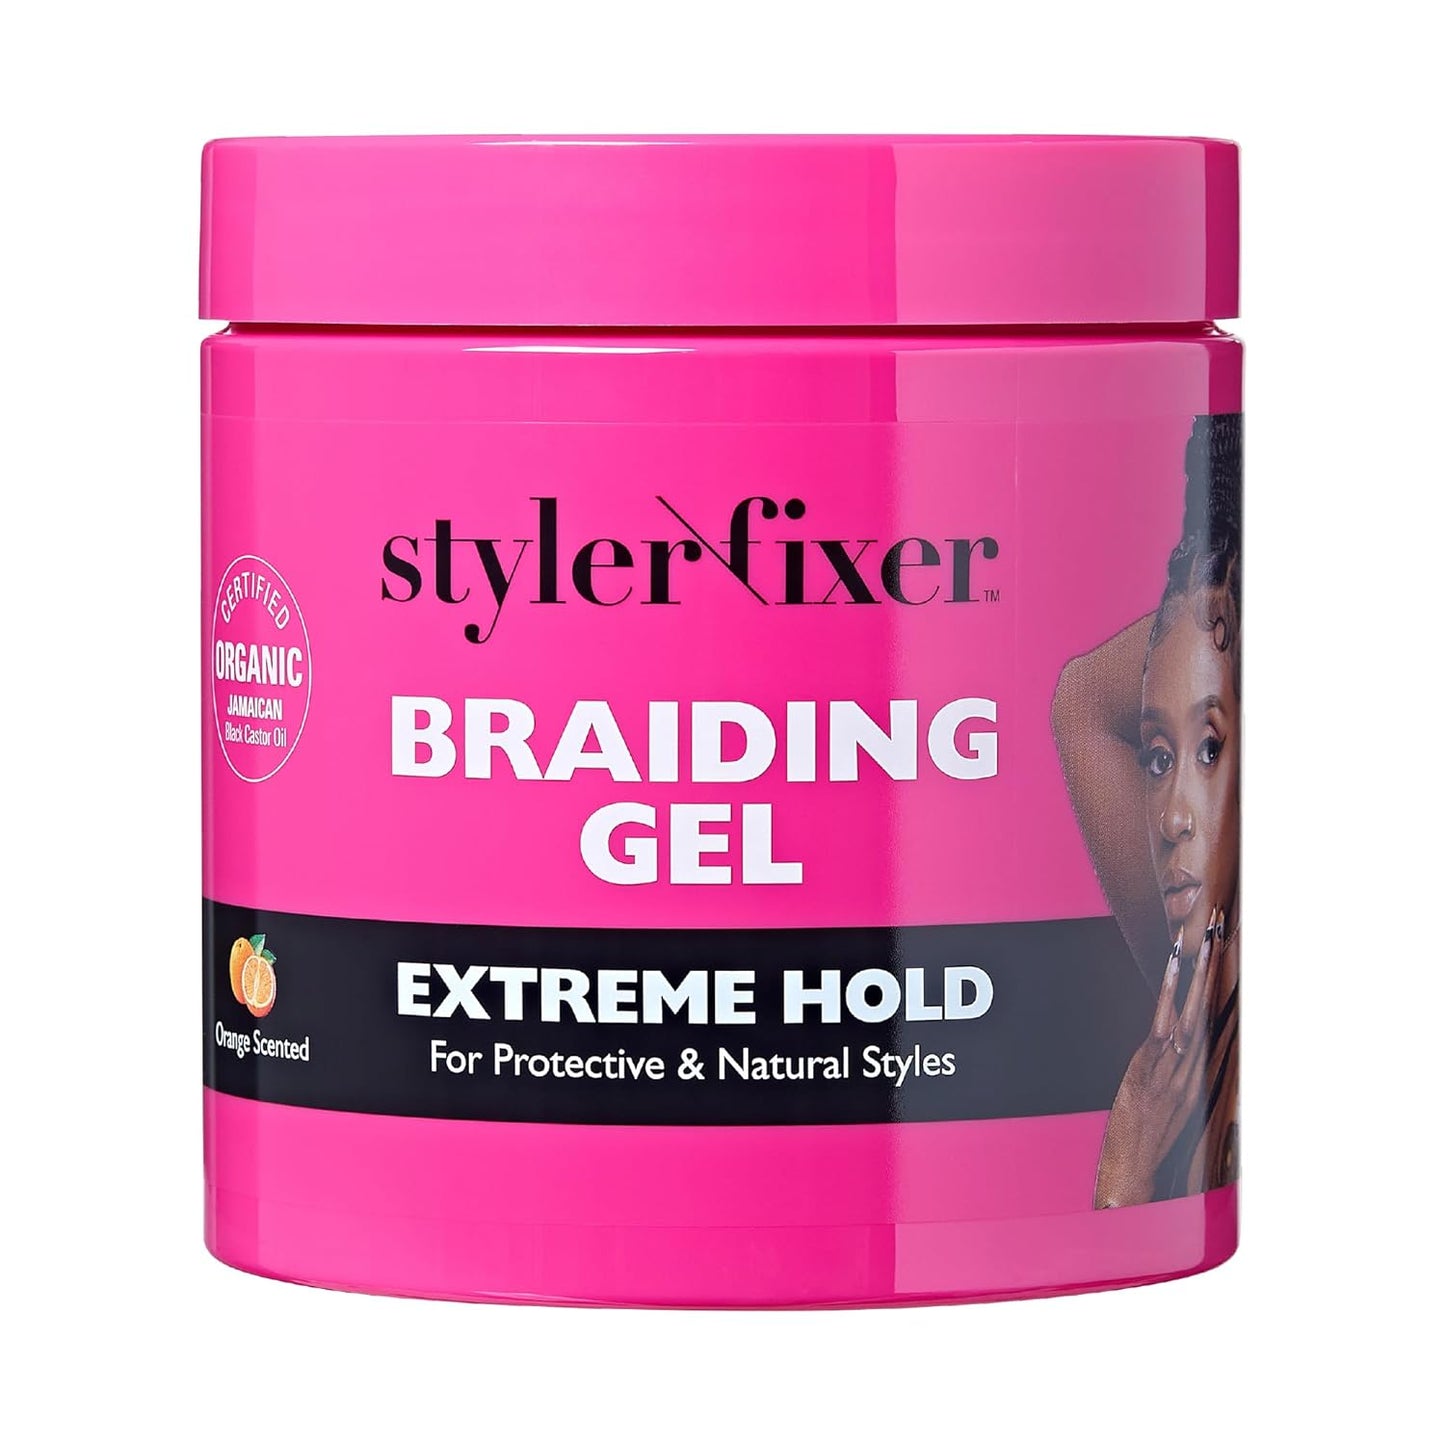 RED Styler Fixer Braiding Gel Extreme Hold 6oz